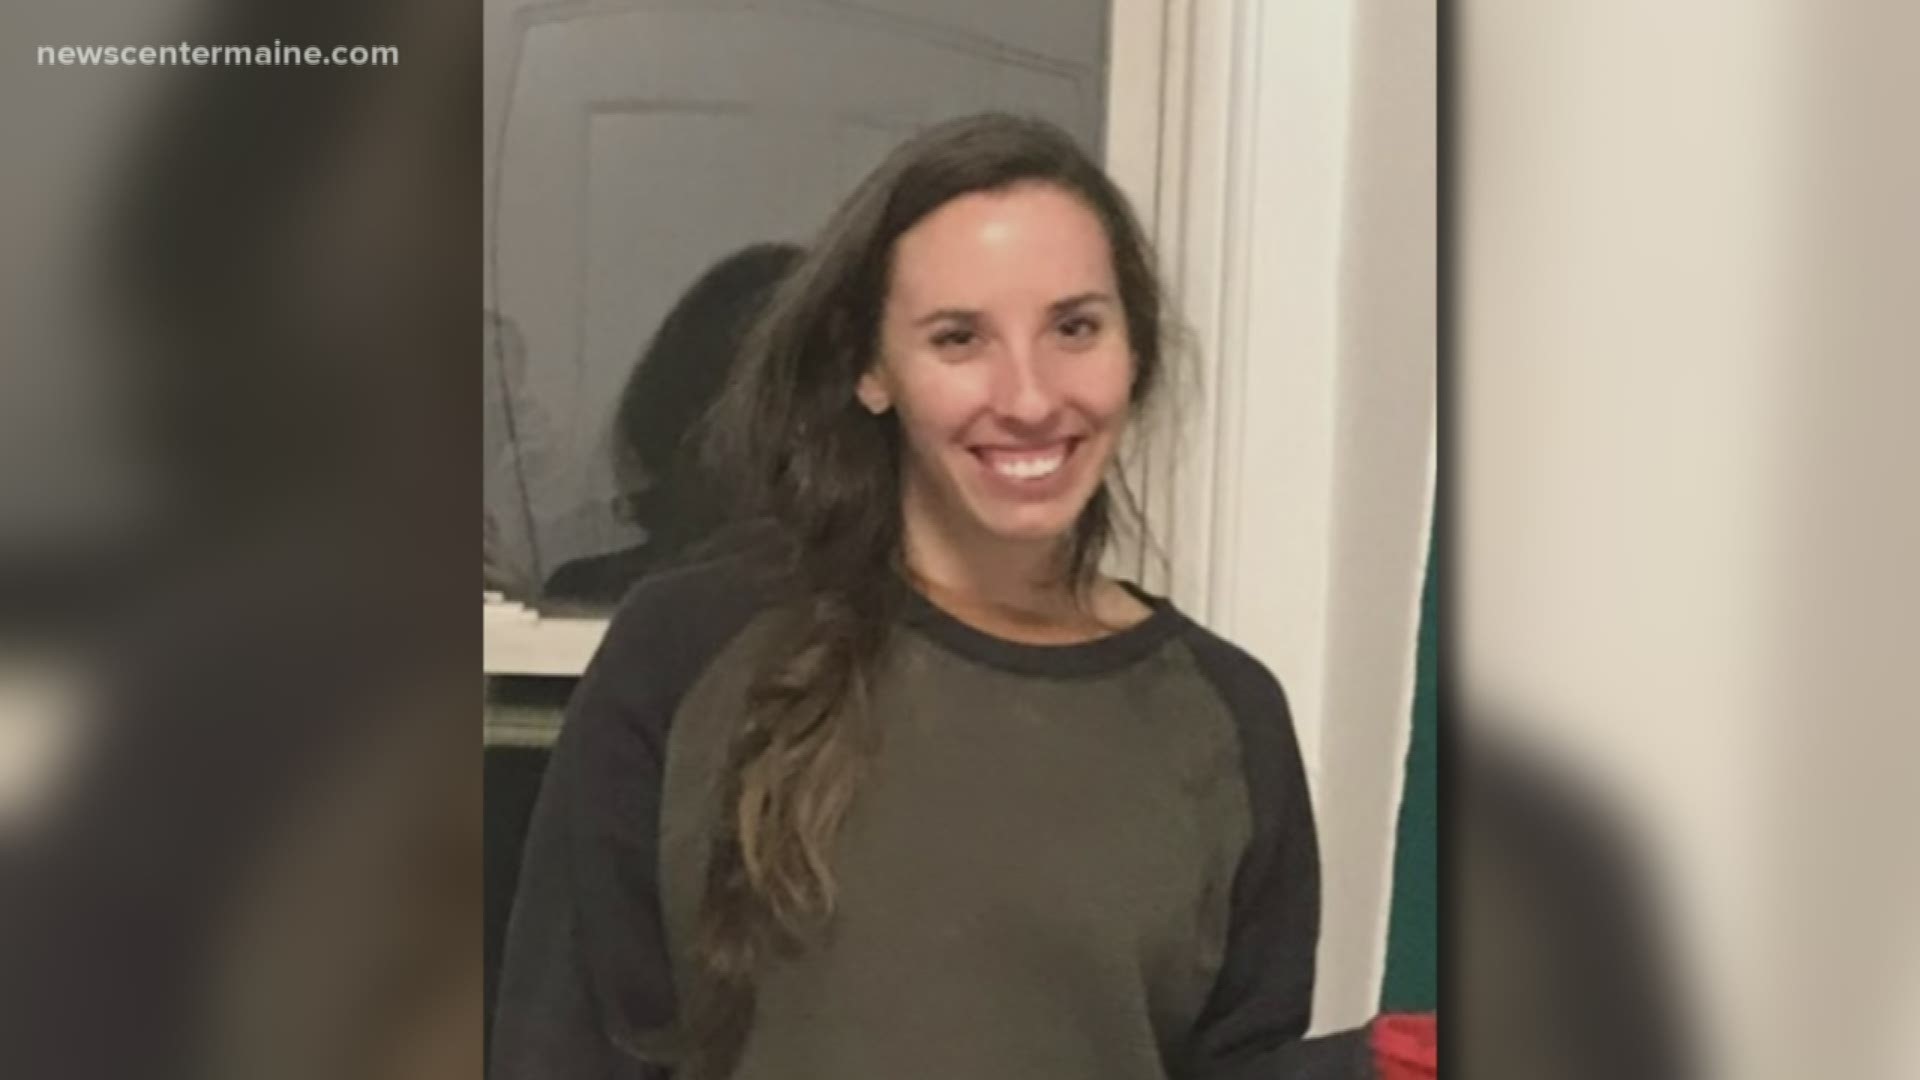 Cumberland County Sheriff's Office is asking the public's help to locate Sarah McCarthy. She was last seen leaving work.